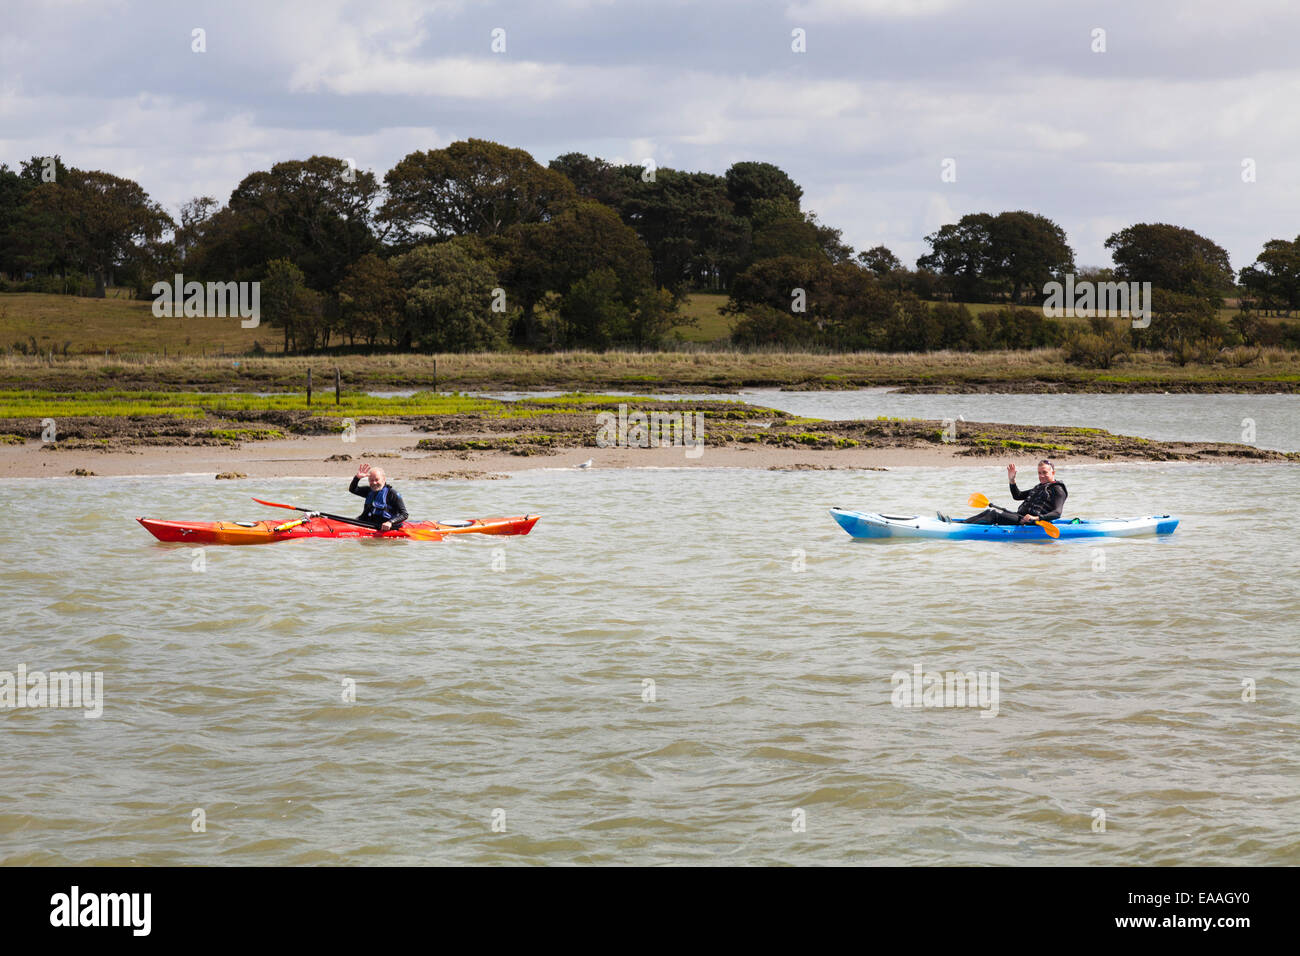 Canoeists on a river waving at a passing boat Stock Photo